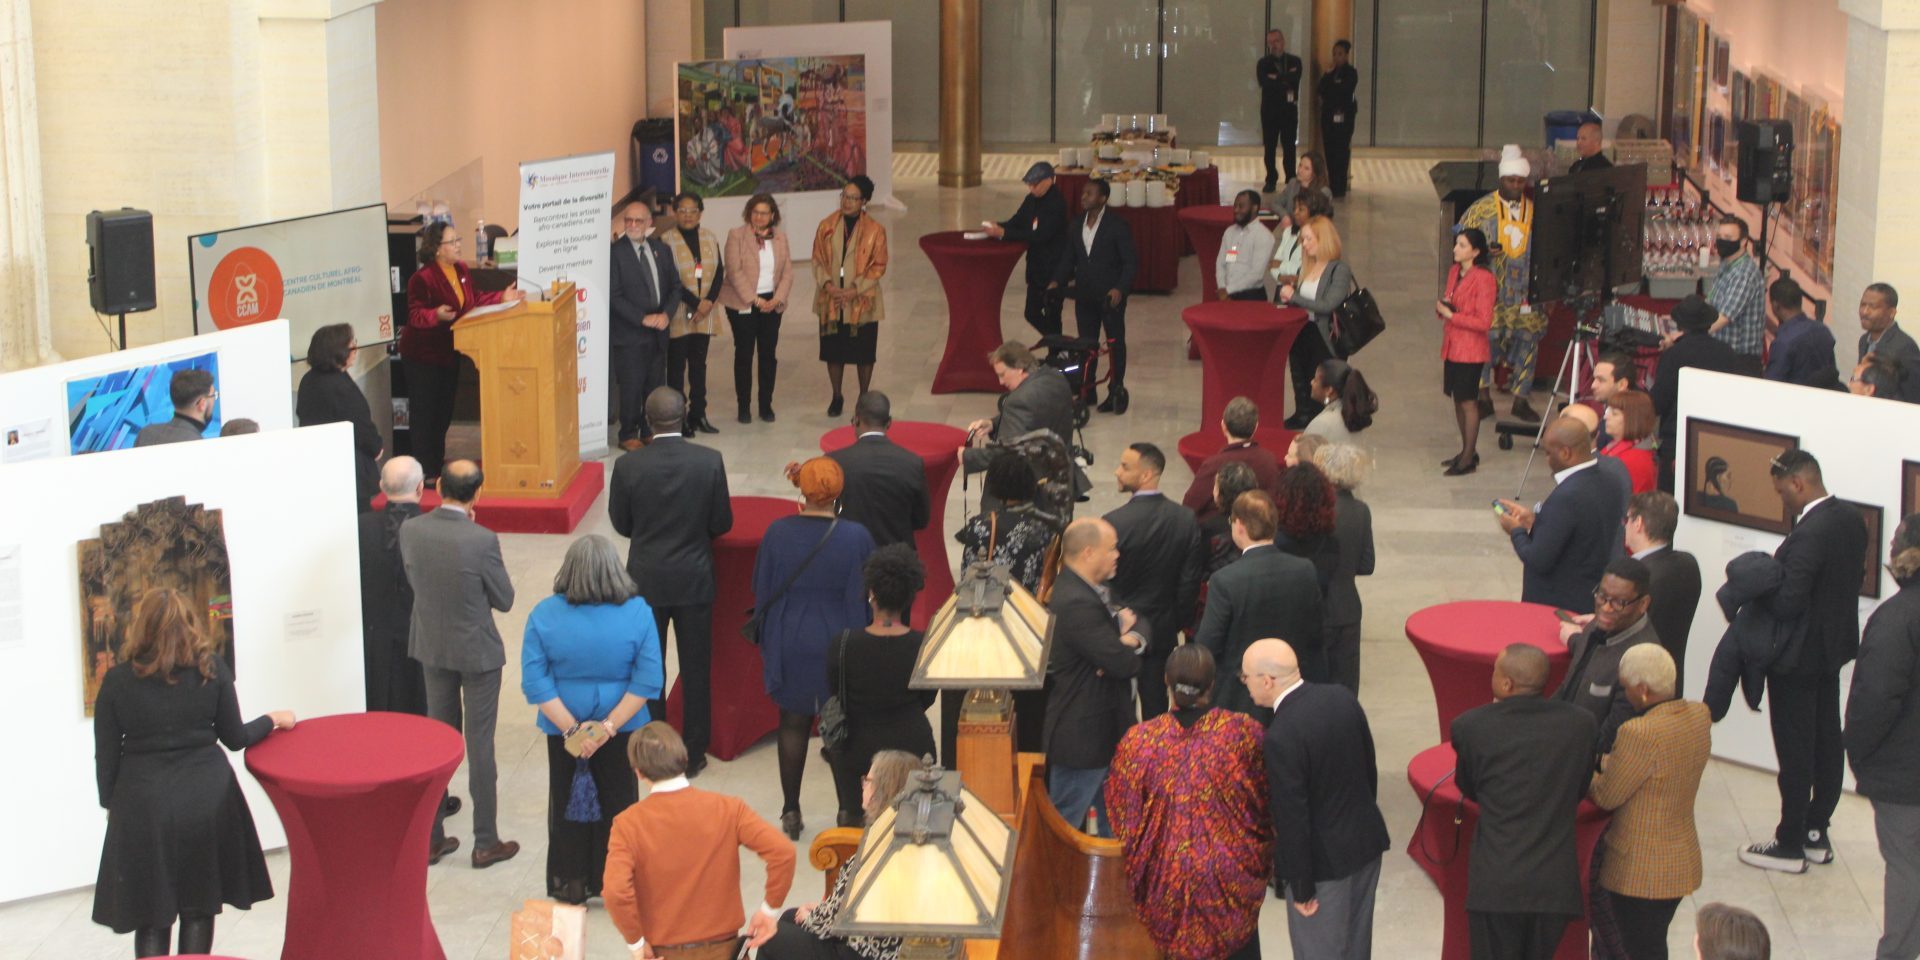 The crowd at the Senate African Canadian Caucus' vernissage for its Black History Month exhibit on Feb. 1, in the Senate Foyer. The exhibit will be on display the entire month of February.